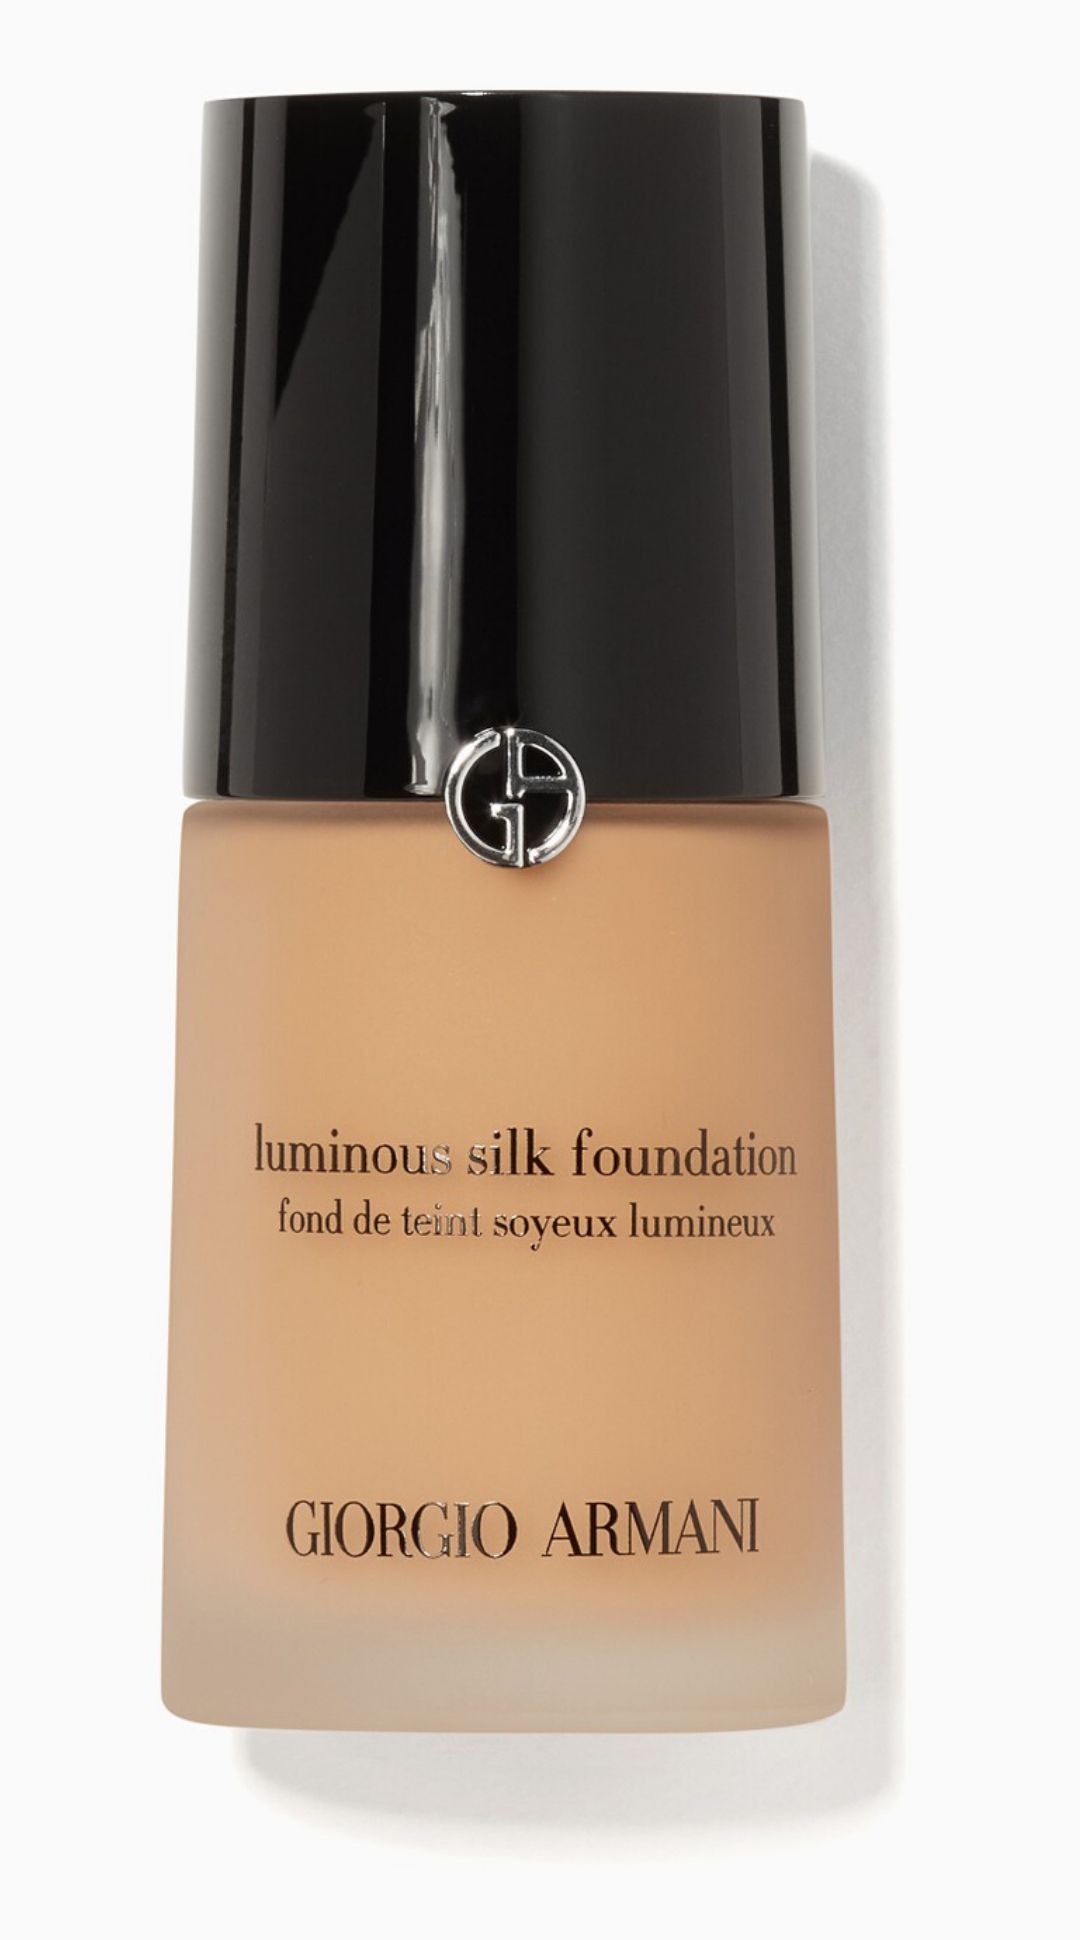 The 10 best foundations and concealers of all time | Cosmopolitan ...